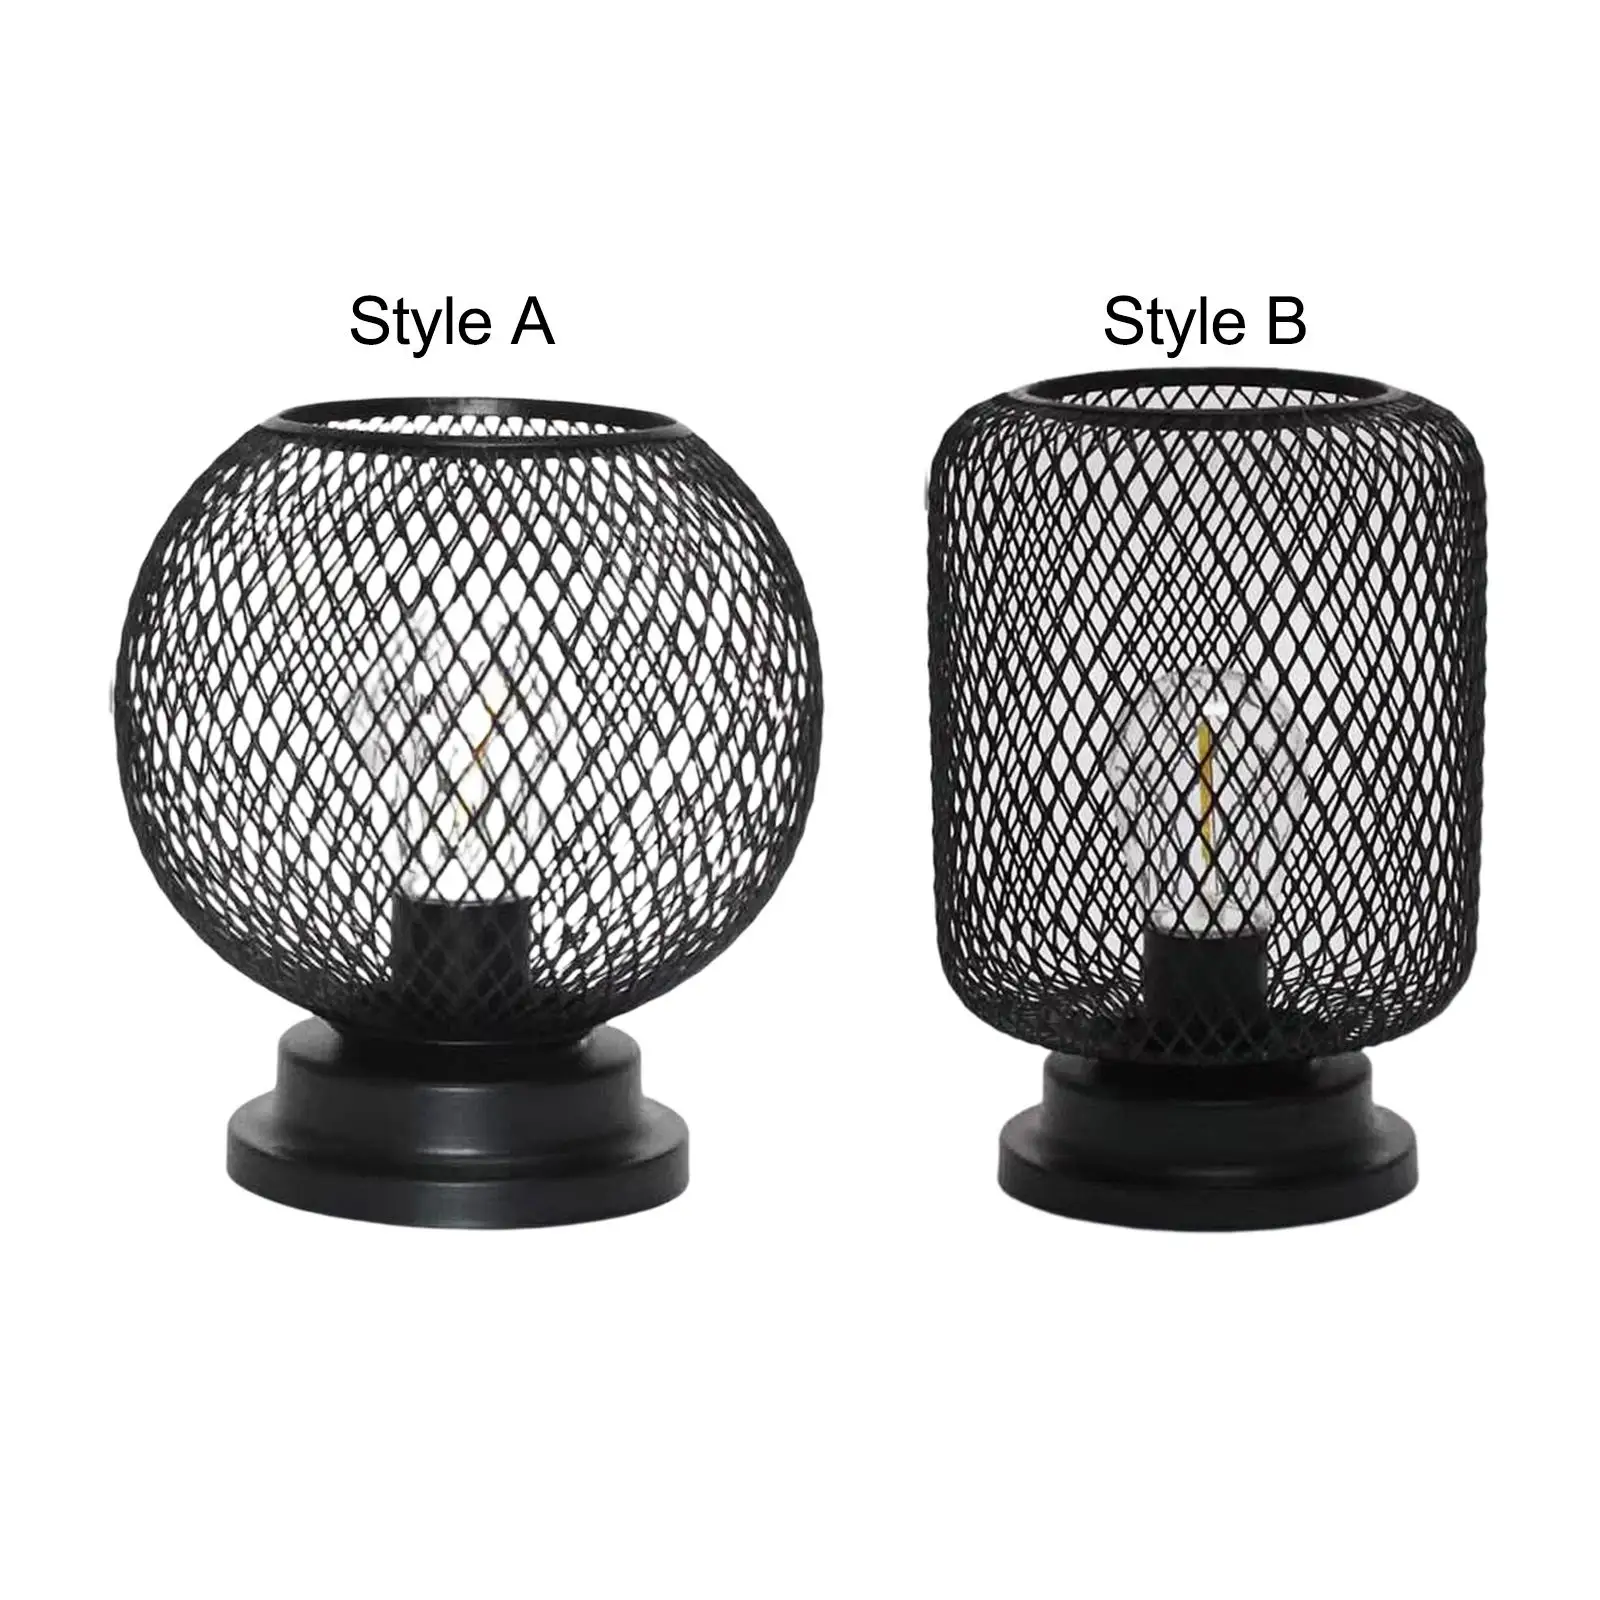 Desk Table Lamp Metal Wire Basket Cage Antique NightStand Lamp Vintage Table Lamp for Reading Living Room House NightStand Home